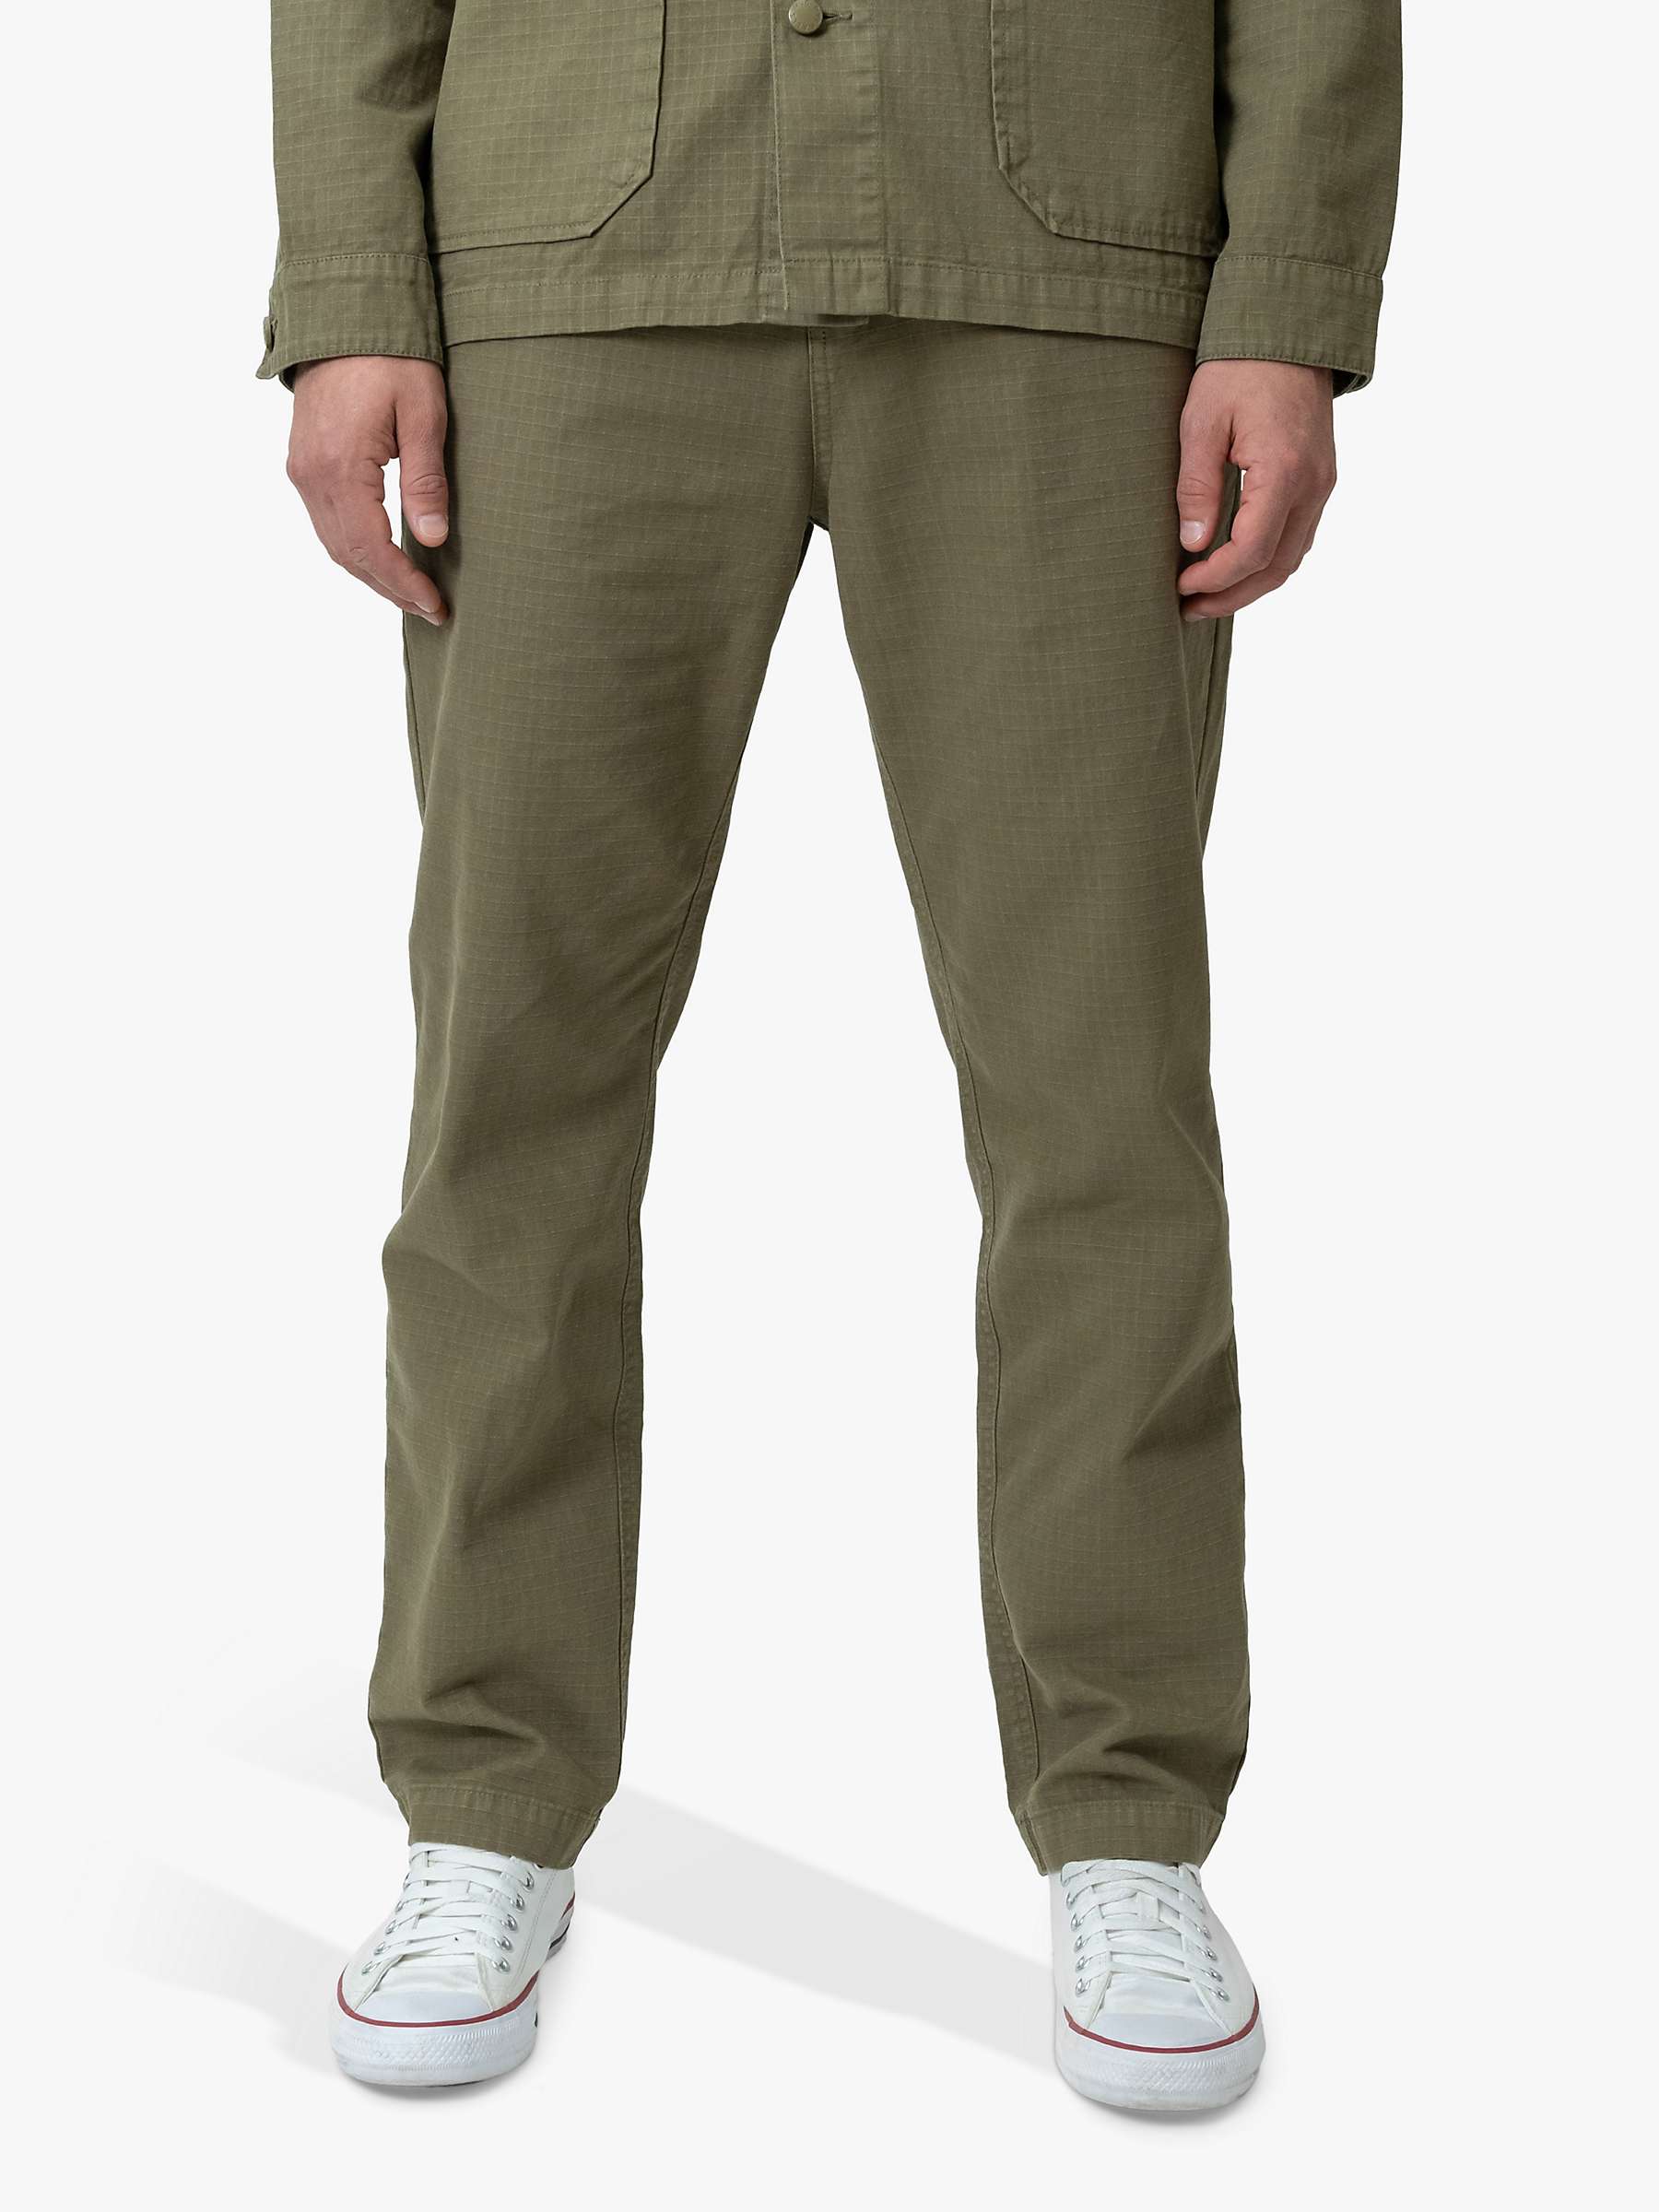 Buy M.C.Overalls Relaxed Fit Ripstop Trousers Online at johnlewis.com